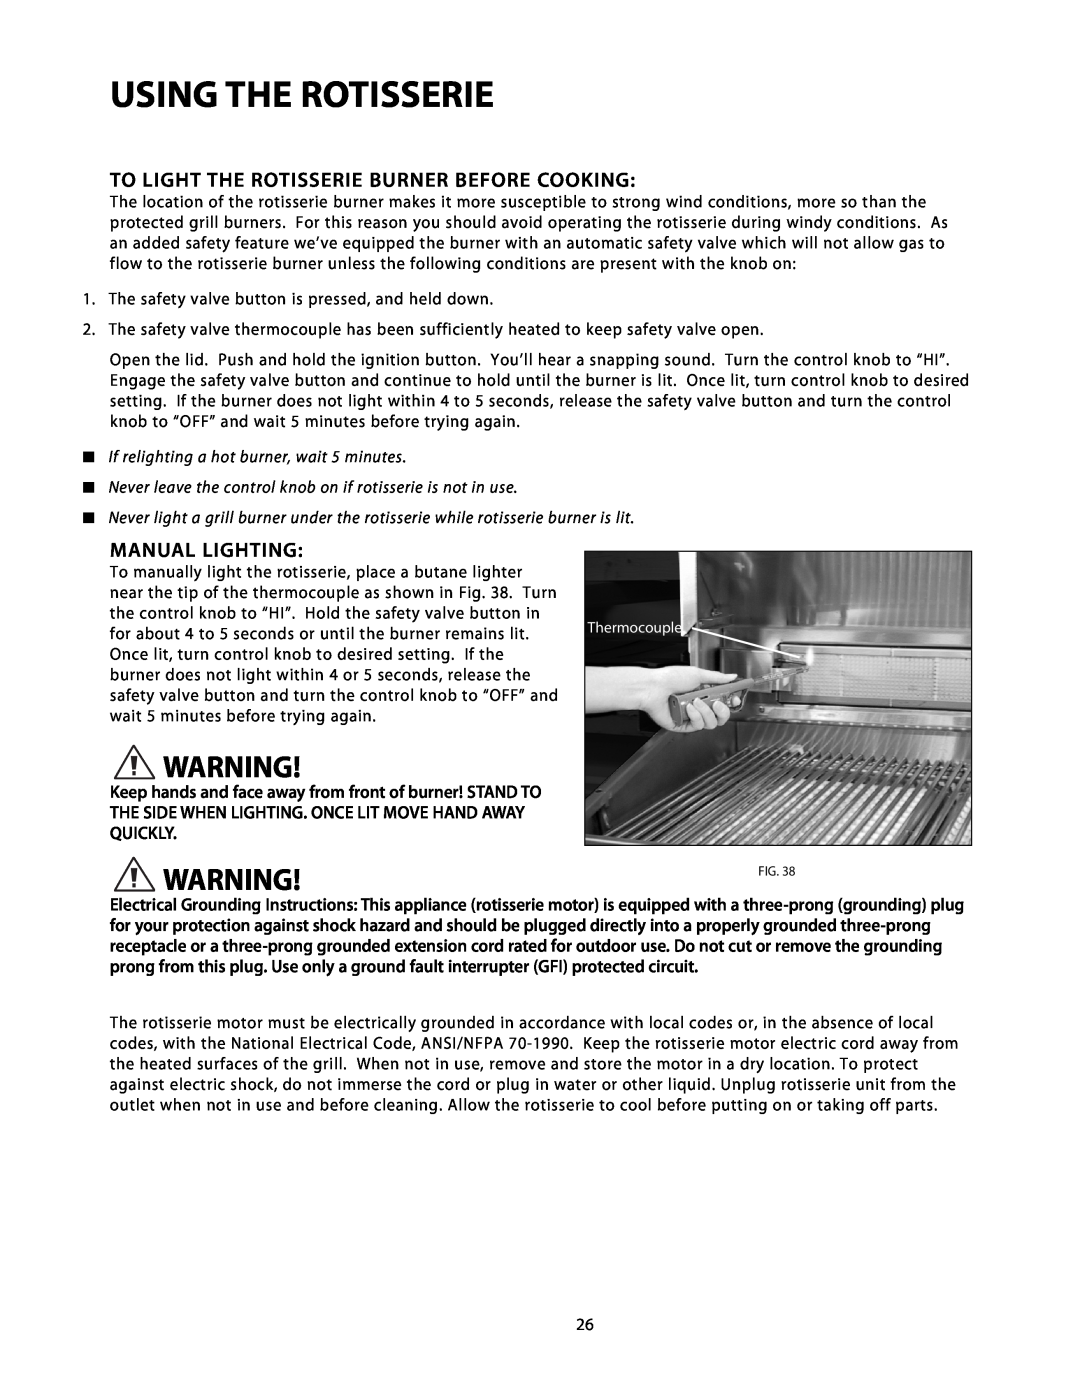 DCS BGB48-BQR manual Warning!Fig, To Light The Rotisserie Burner Before Cooking, Manual Lighting, Using The Rotisserie 